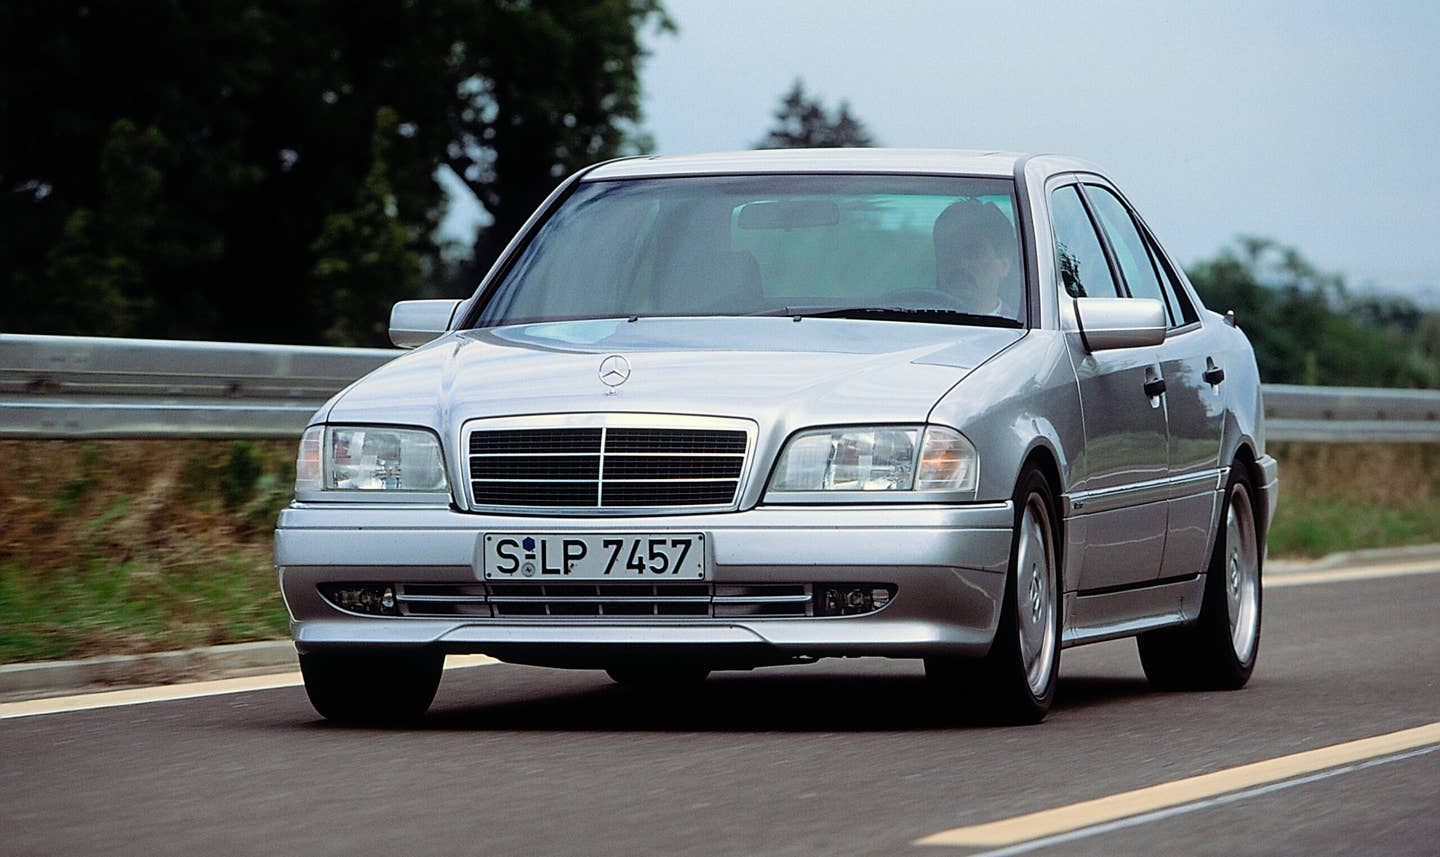 Mercedes-Benz C 36 AMG from model series 202, production period 1993 to 1997. Exterior, driving shot from rear left. Photo from 1993.